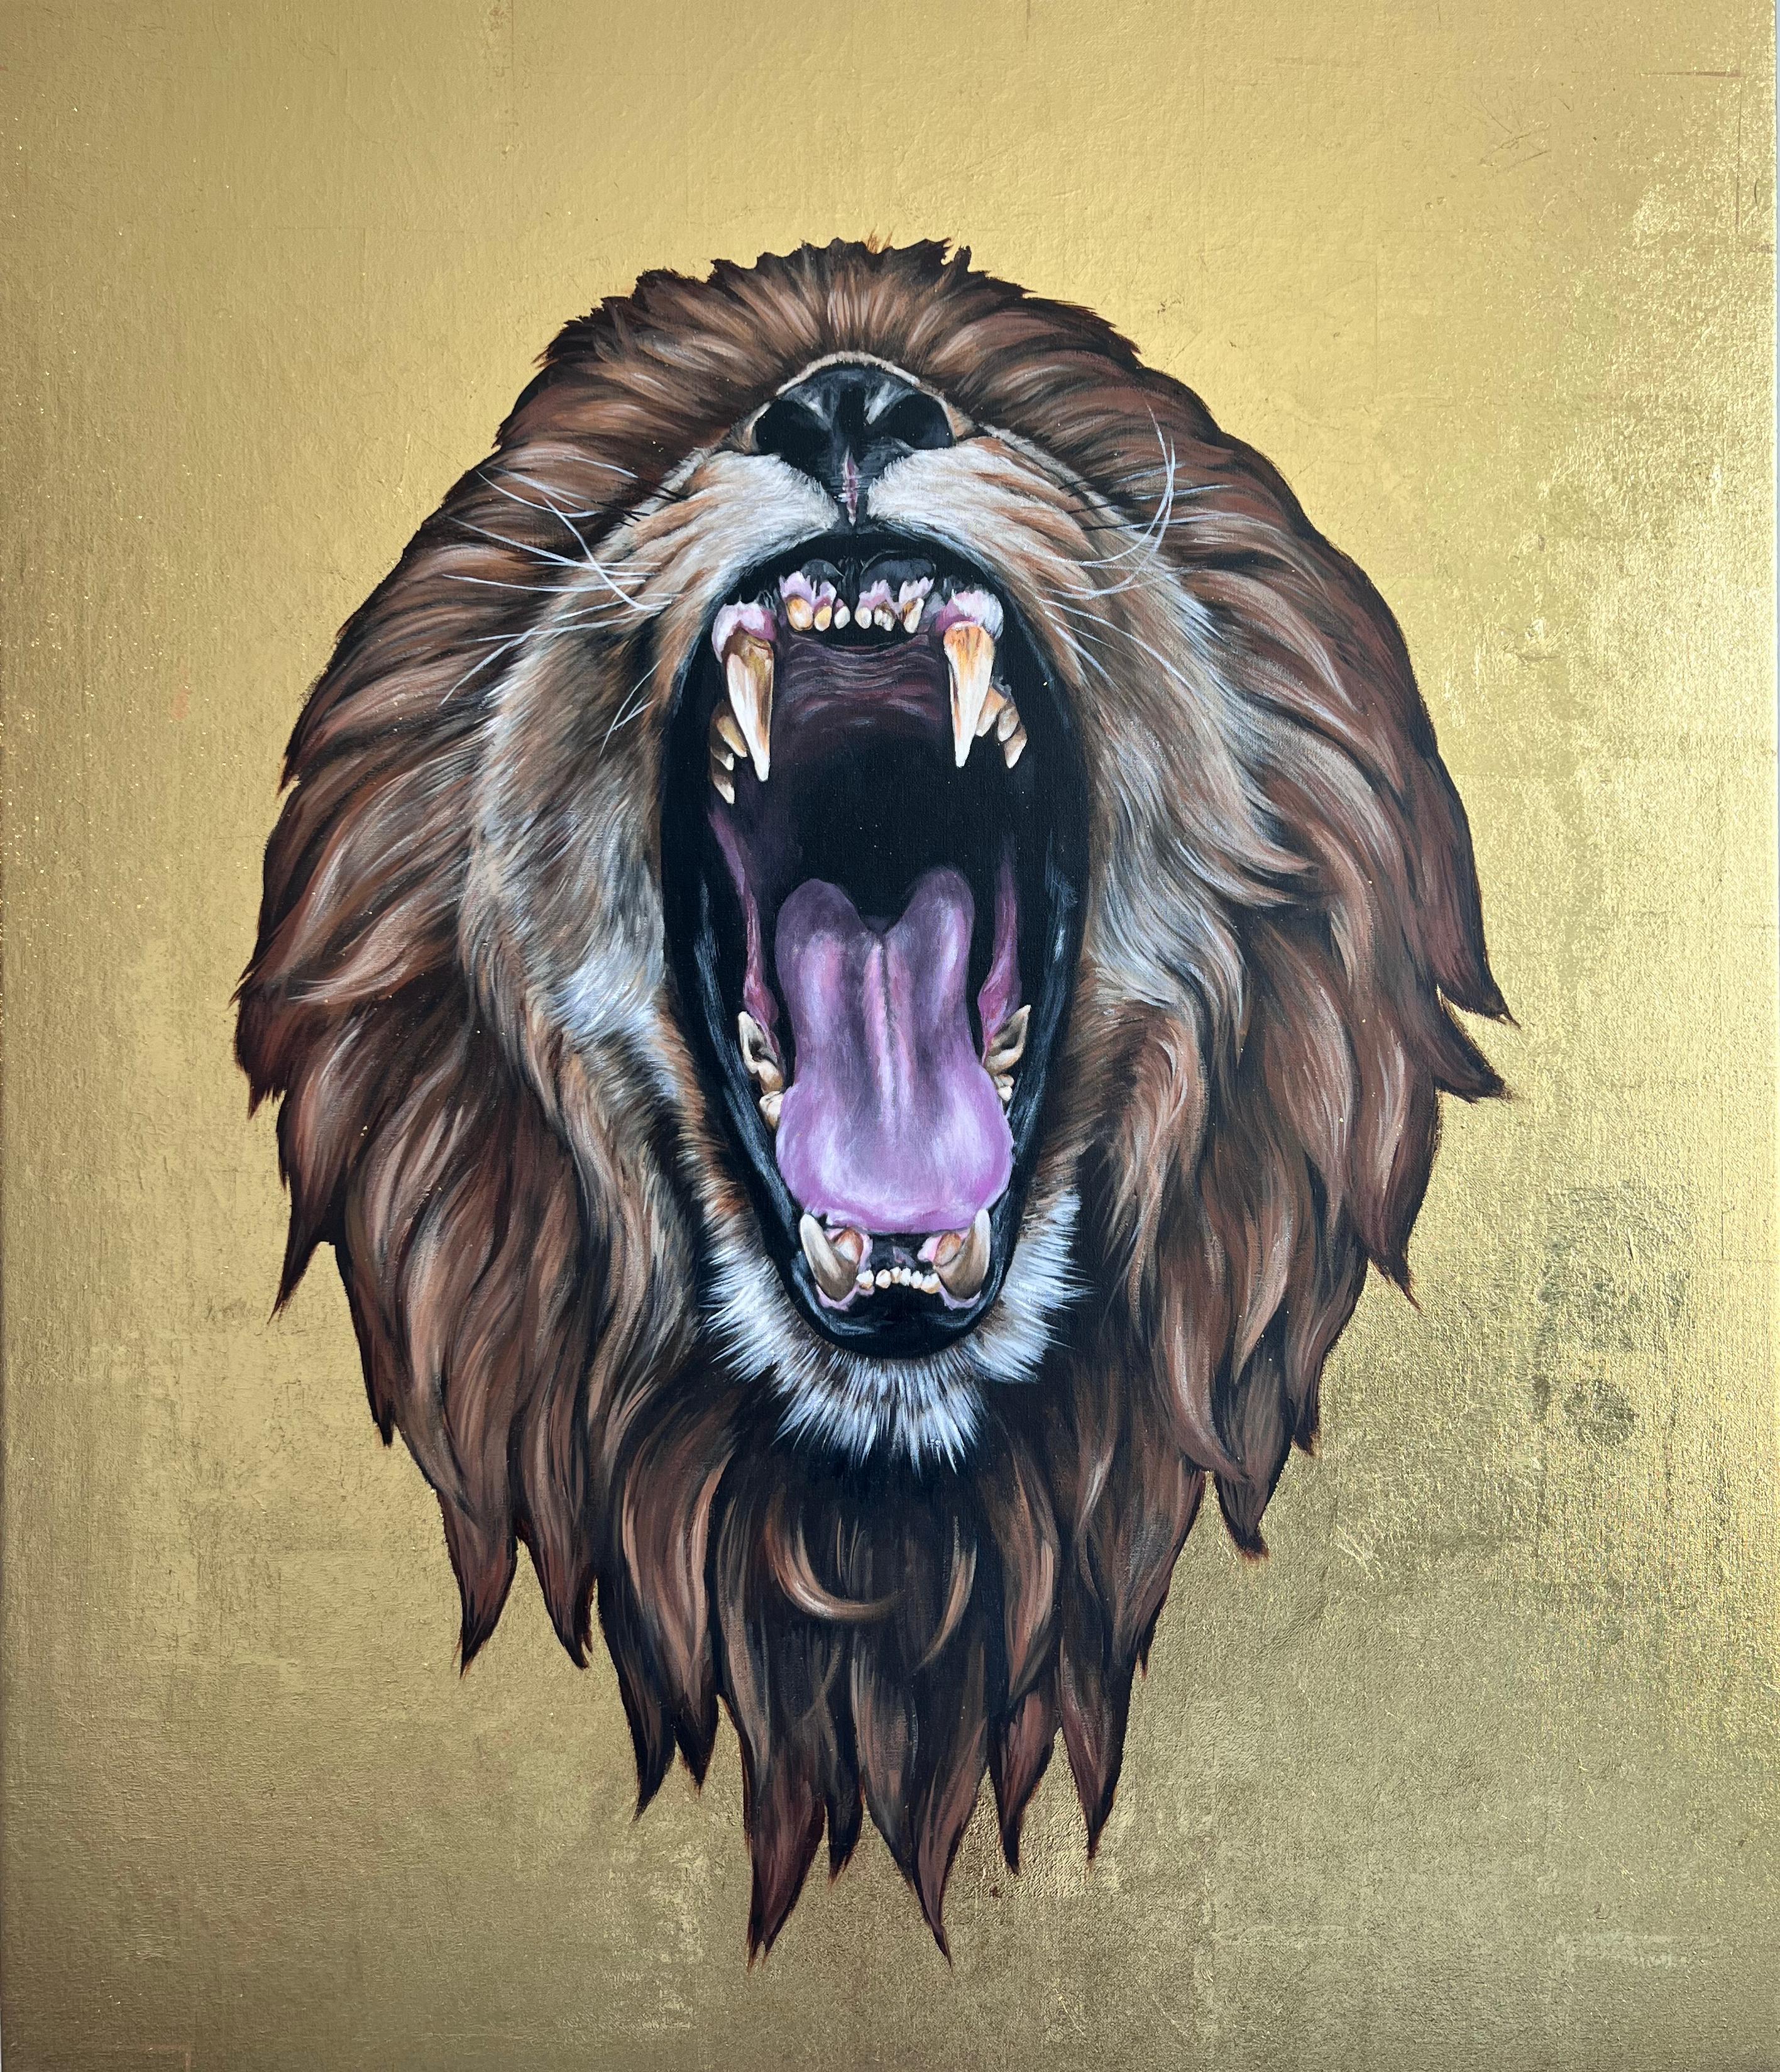 "Lion 1" Painting 39" x 31.5" inch by Alina Shimova 

PURE SOUL series 
Shimova cares about the conservation of the fauna. She draws public attention to the problems of animals, especially wild and endangered species. Shimova is Vice-president of